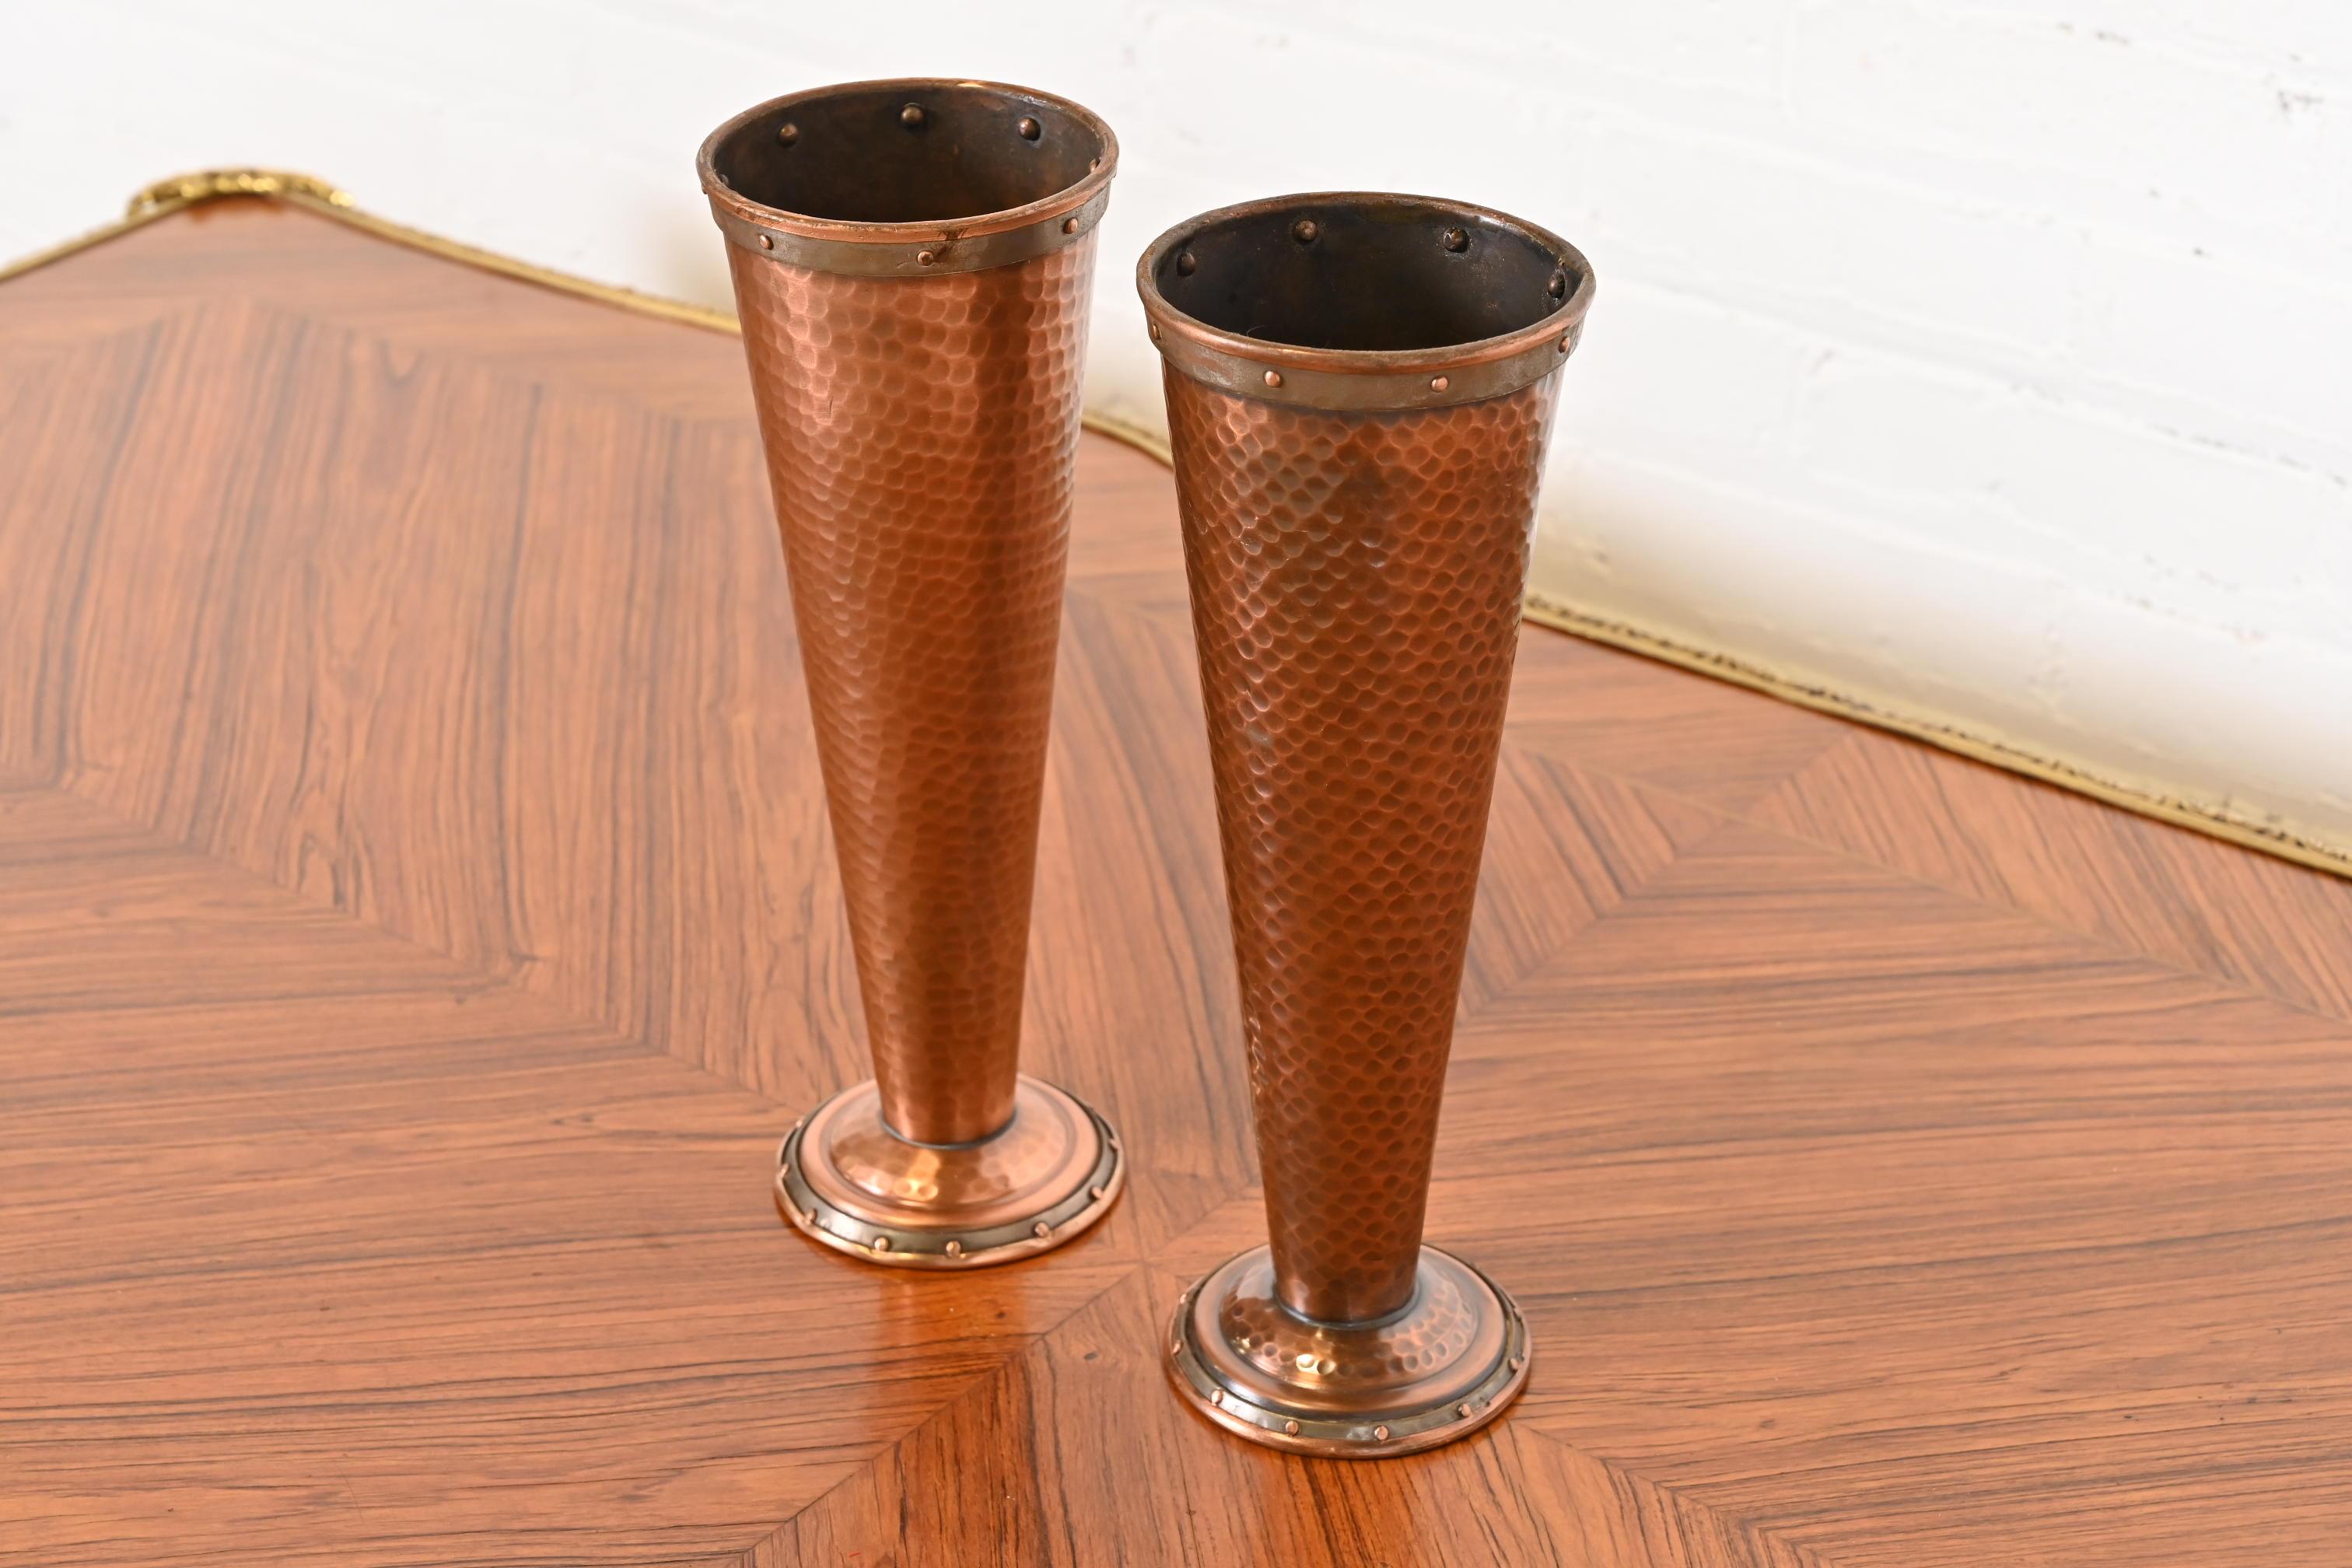 Joseph Heinrichs Style Arts and Crafts Hand-Hammered Copper Vases, Pair In Good Condition For Sale In South Bend, IN